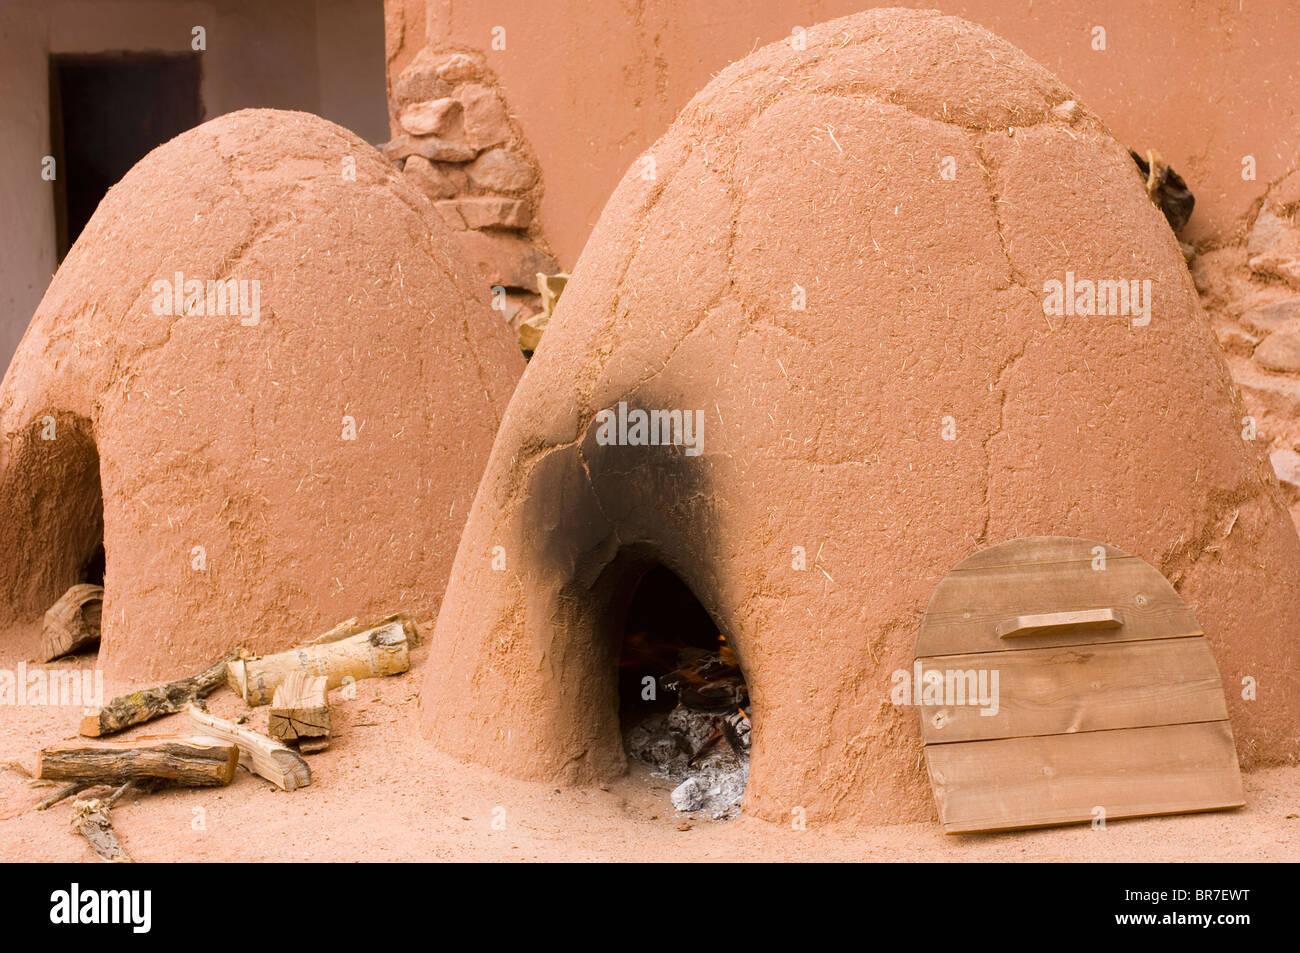 Two traditional outdoor ovens in New Mexico. Stock Photo